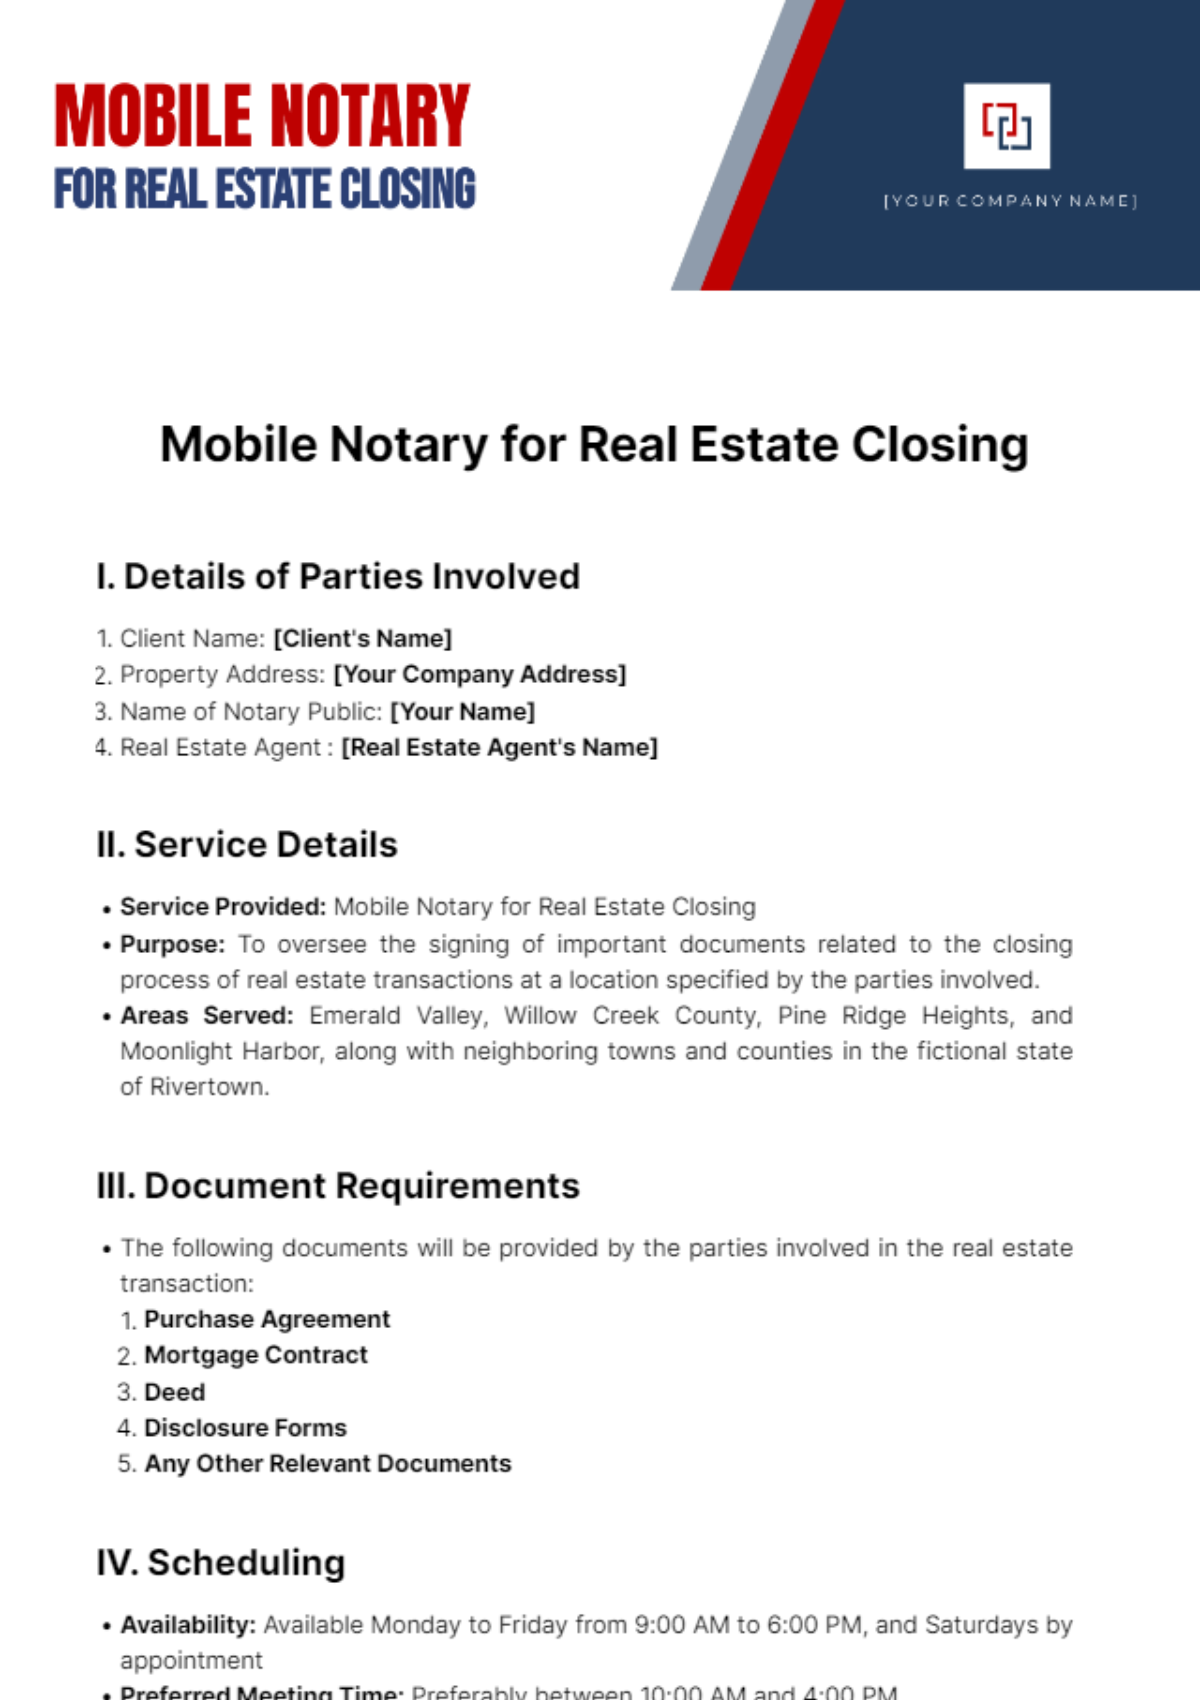 Free Mobile Notary for Real Estate Closing Template